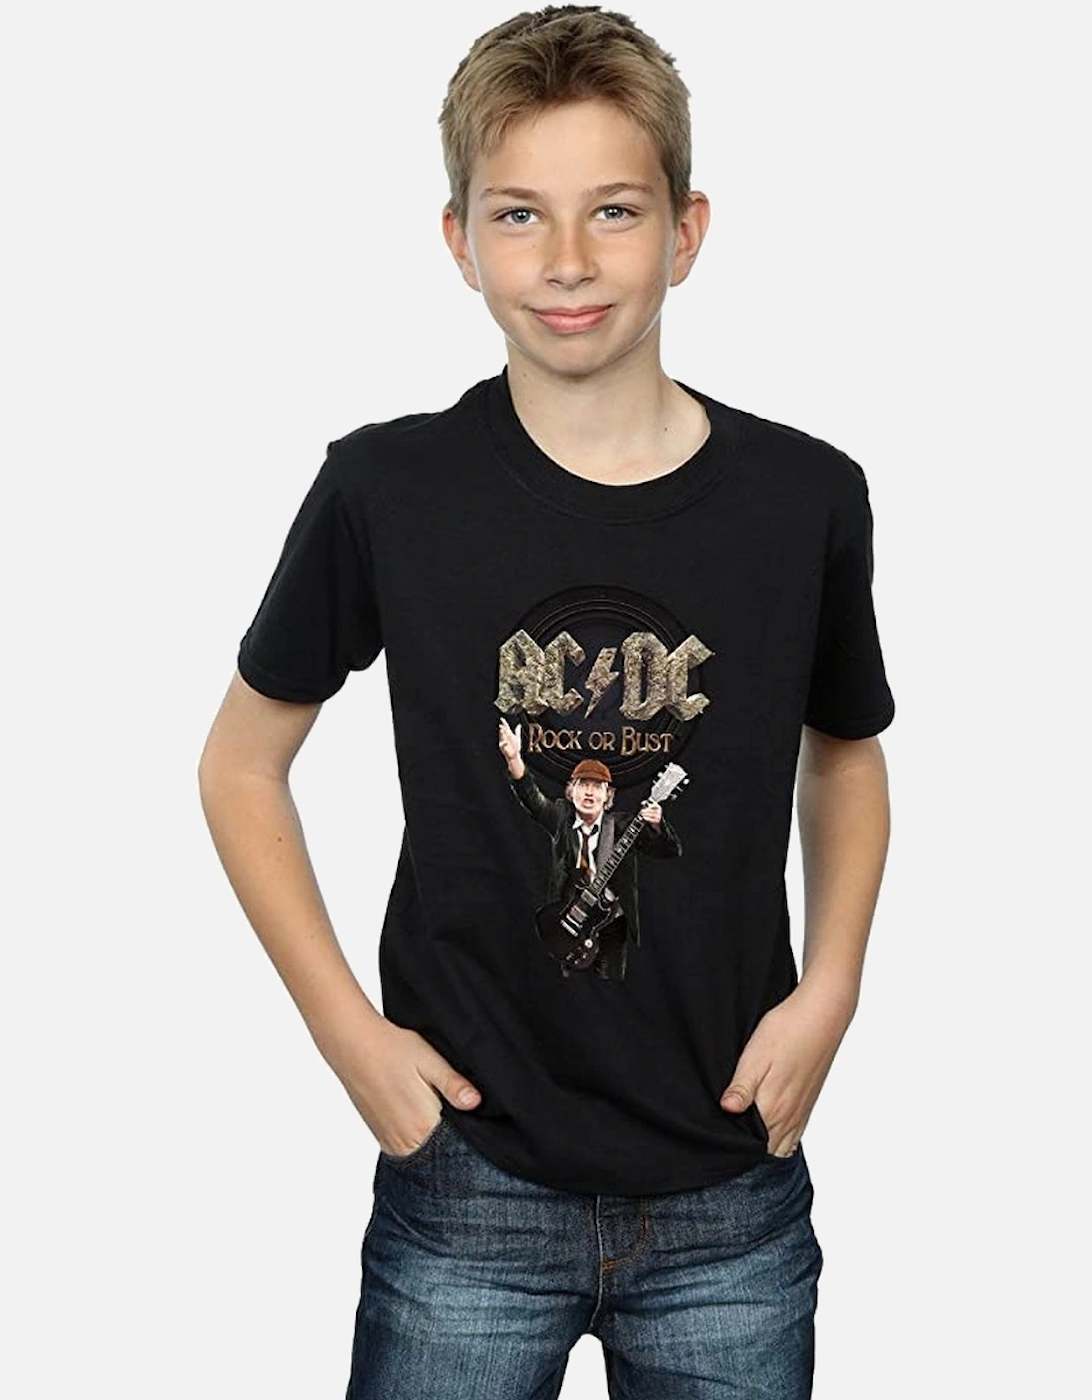 Boys Rock Or Bust Angus Young Cotton T-Shirt